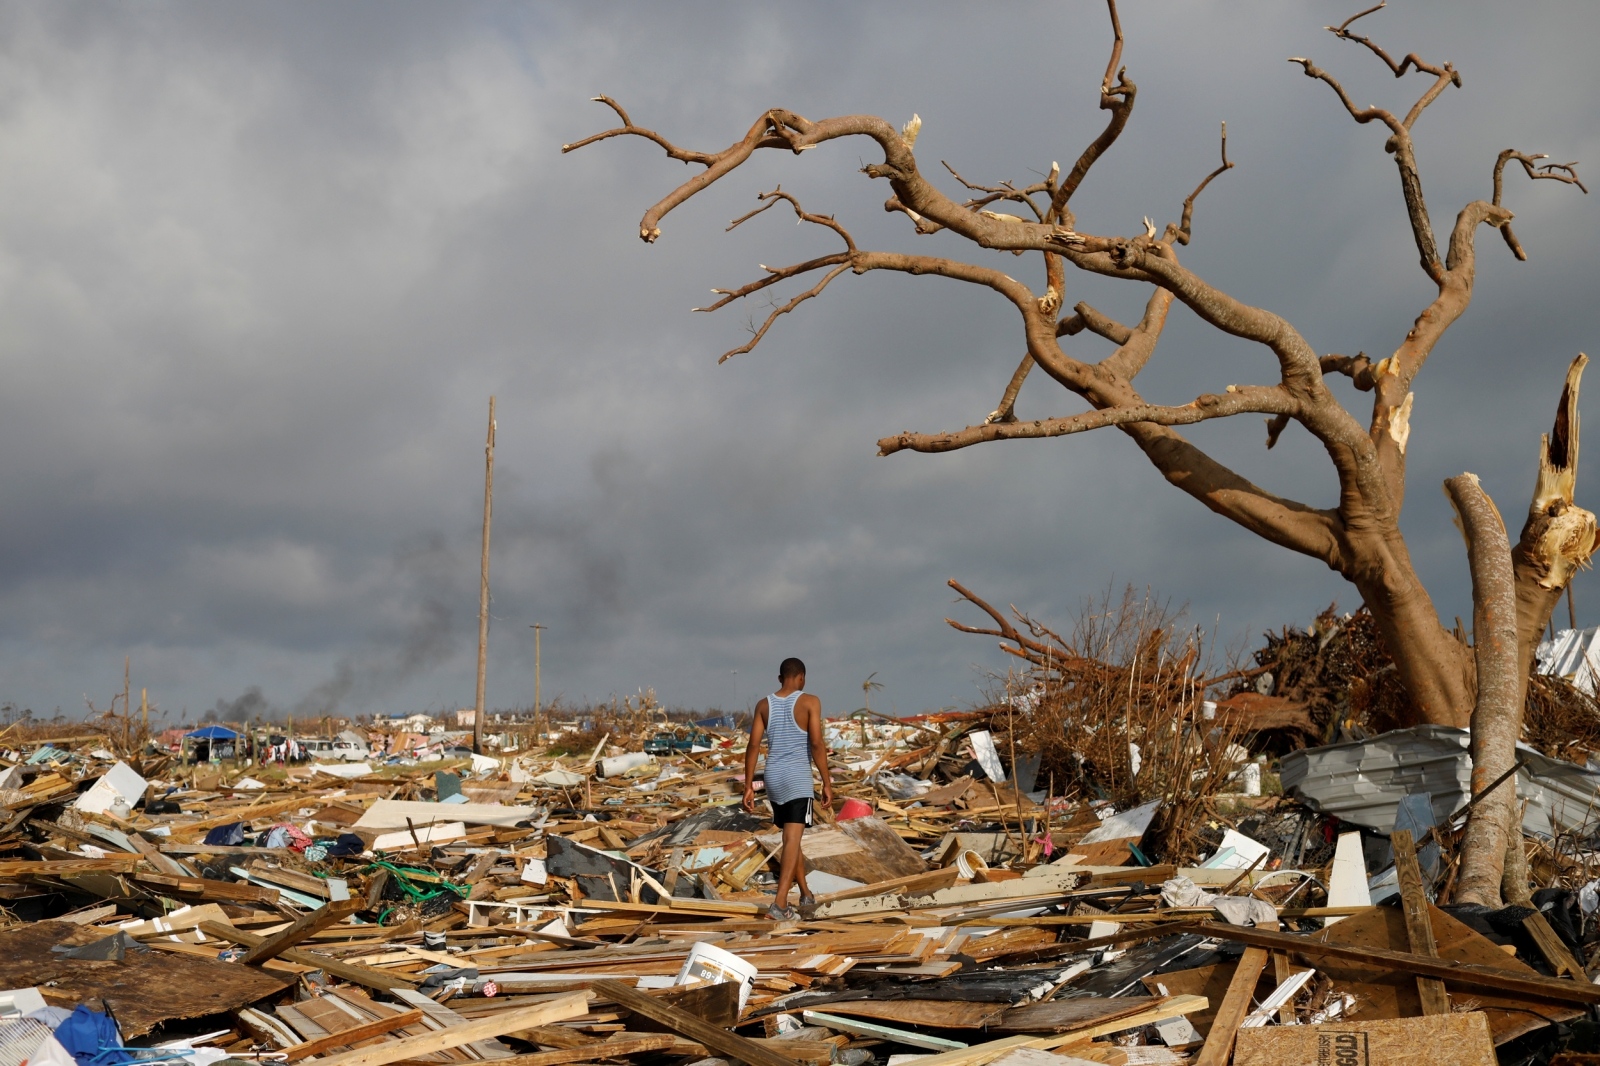 A man walks among debris at the Mudd neighborhood, devastated after Hurricane Dorian hit the Abaco Islands in Marsh Harbour A man walks among debris at the Mudd neighborhood, devastated after Hurricane Dorian hit the Abaco Islands in Marsh Harbour, Bahamas, September 6, 2019. REUTERS/Marco Bello     TPX IMAGES OF THE DAY Marco Bello